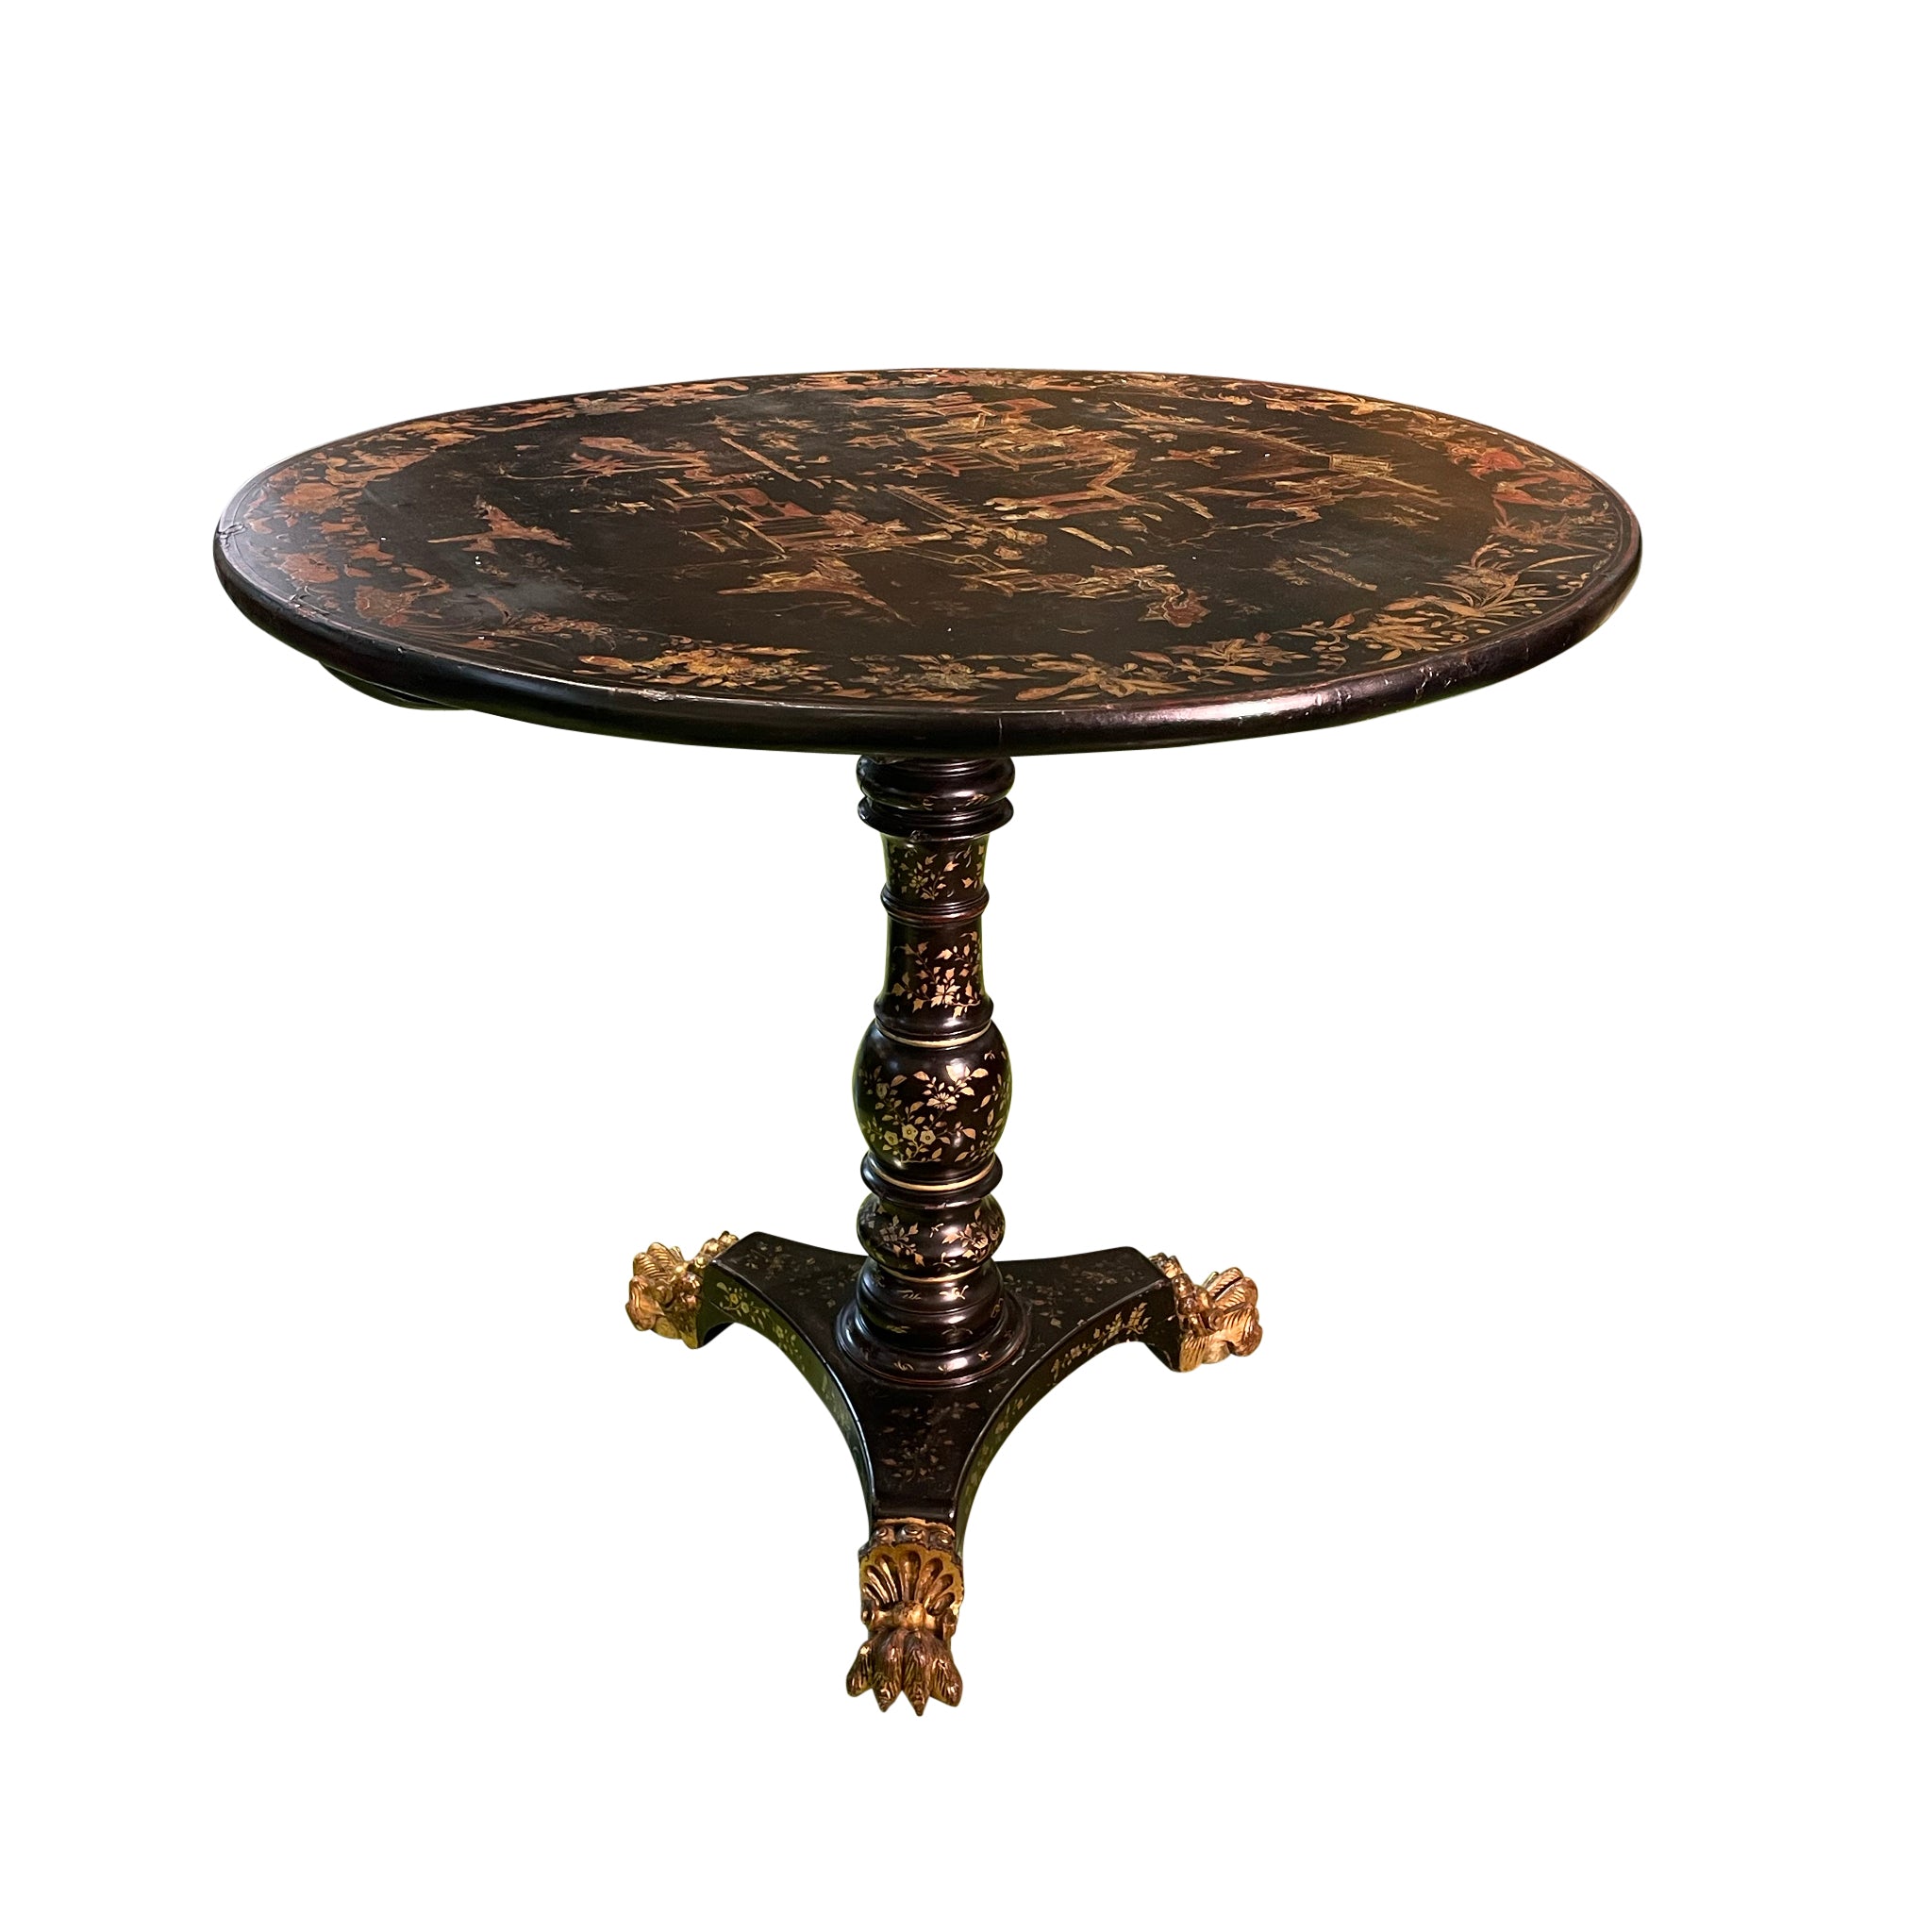 Chinese Export Black Lacquer and Gilt Decorated Table